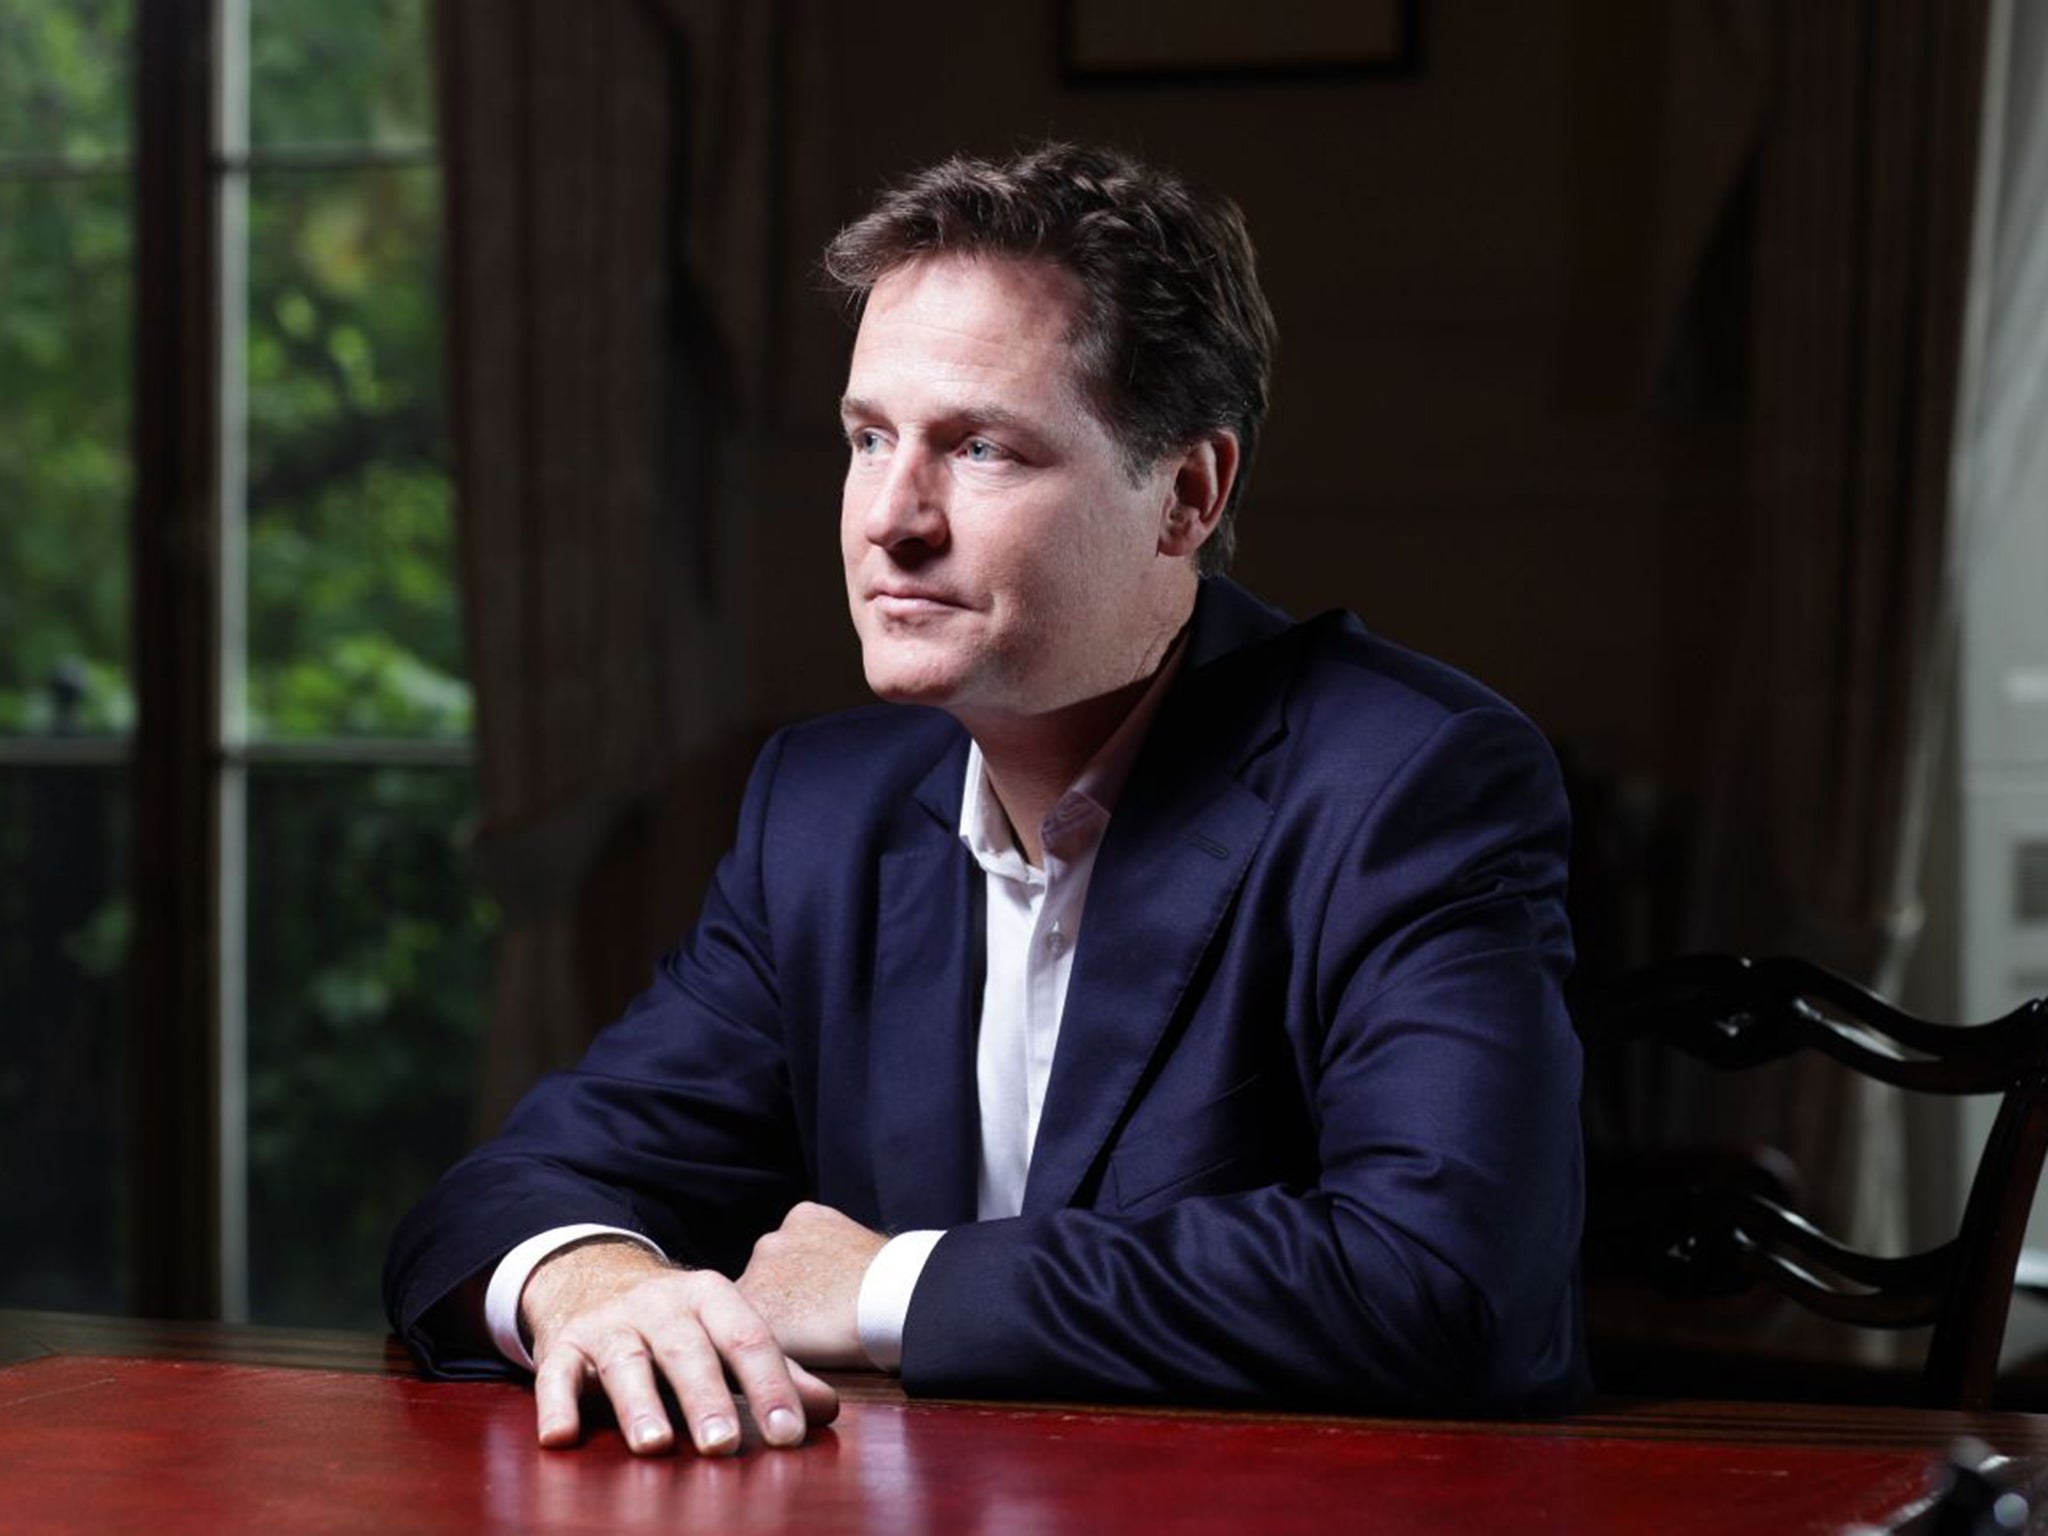 Nick Clegg has dismissed the idea of staying in touch socially with David Cameron